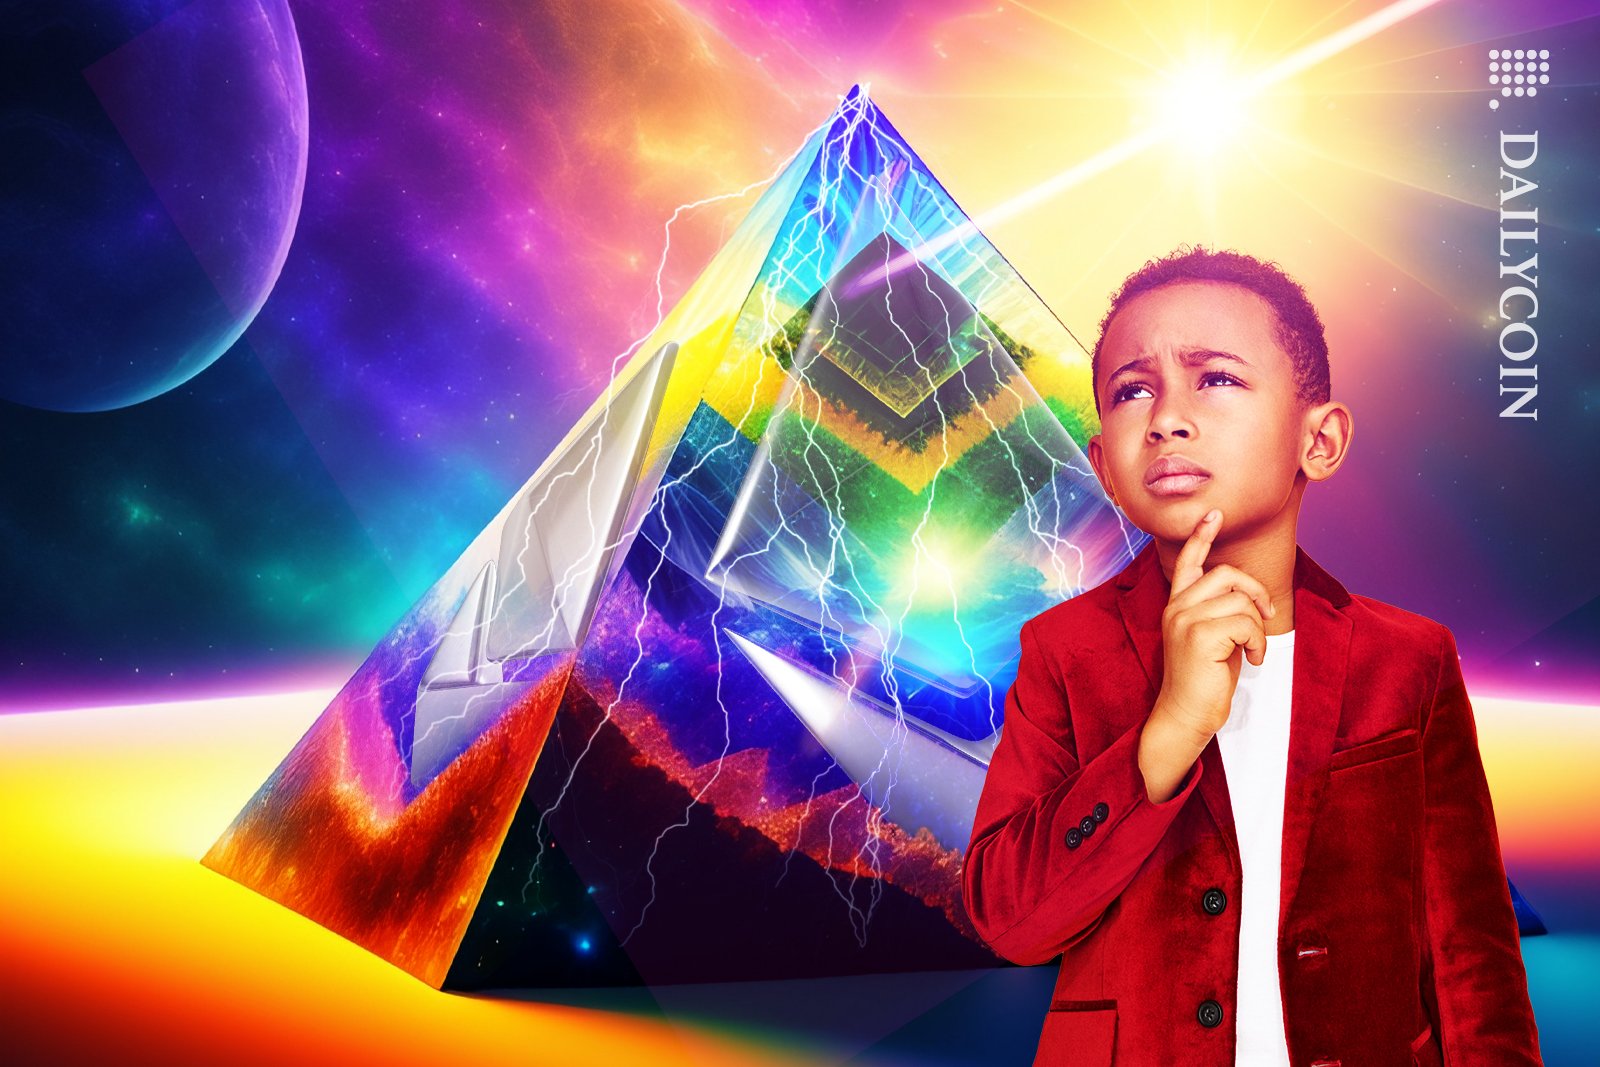 Ethereum lightning machine in a pyramid, a kid is wondering what that could be.